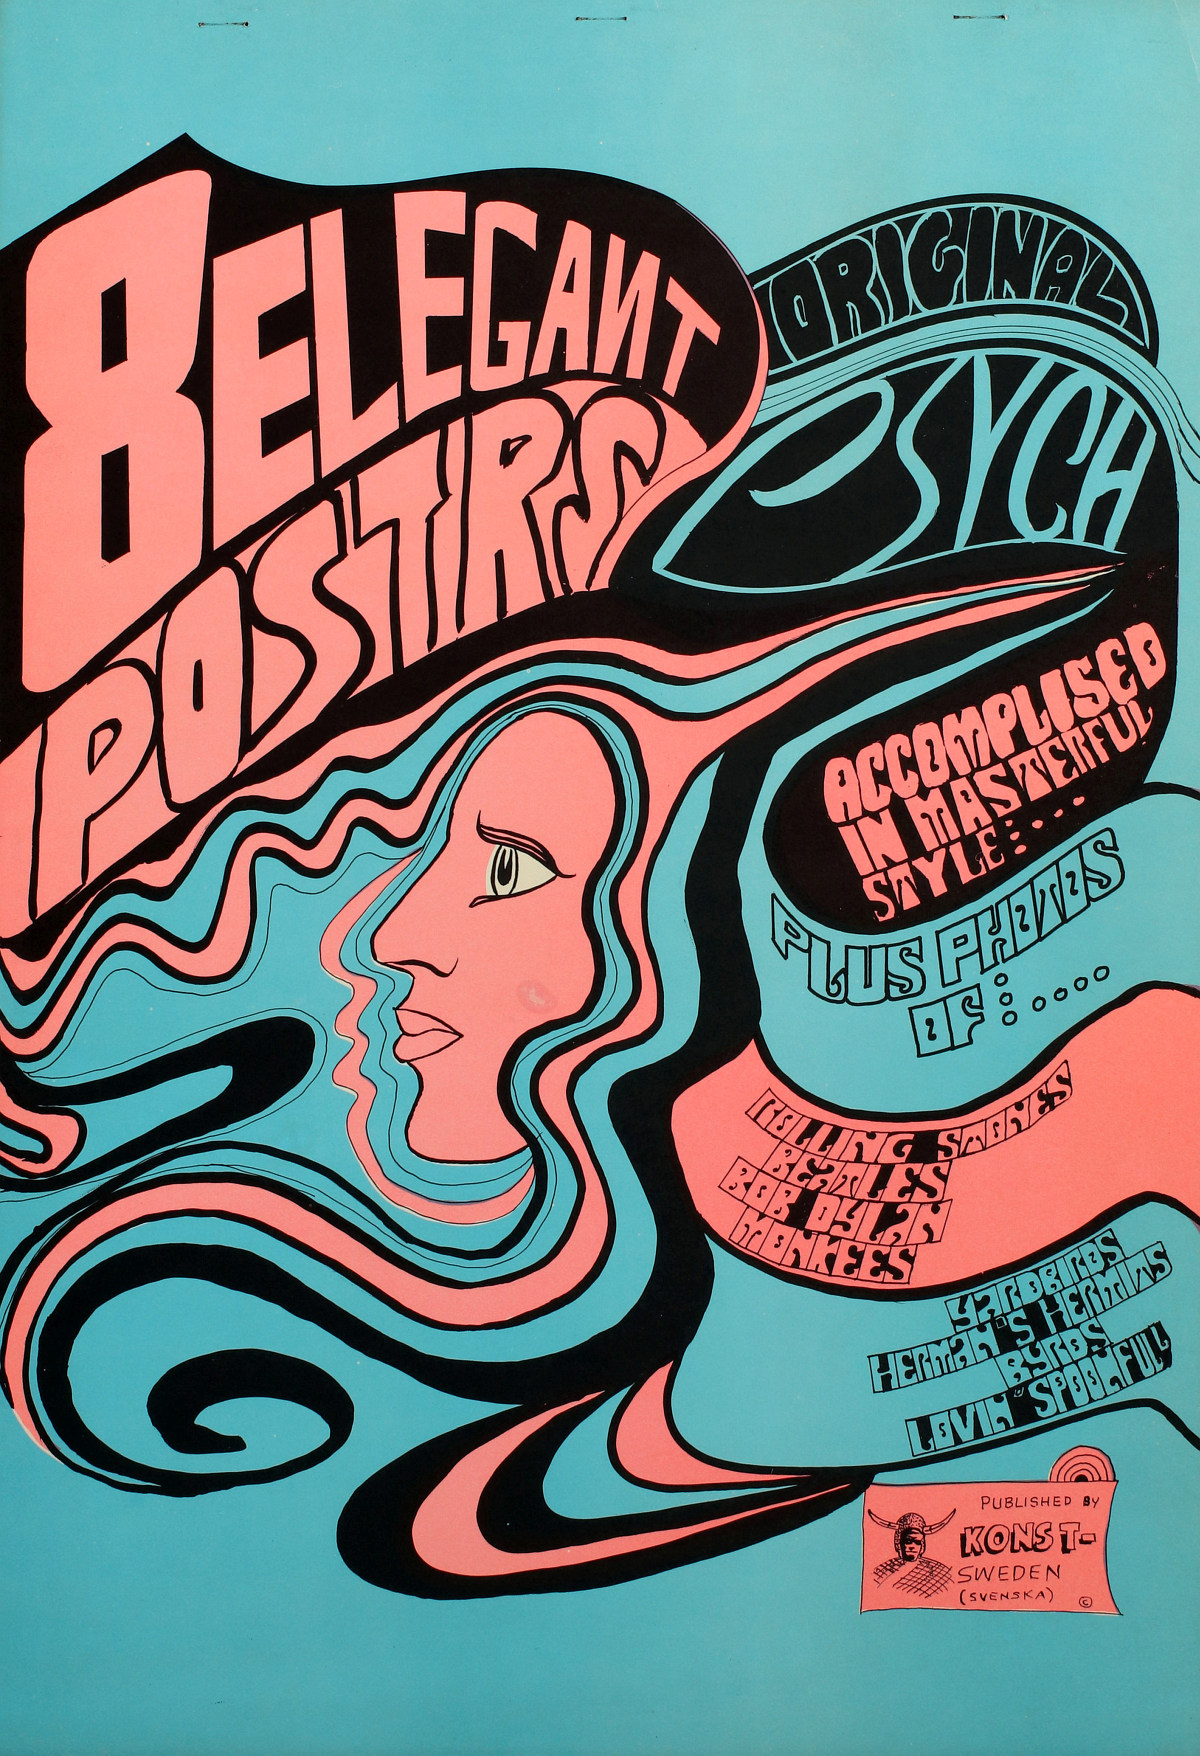 THE COVER DESIGN FOR 1960s PSYCHEDELIC ROCK POSTER SET